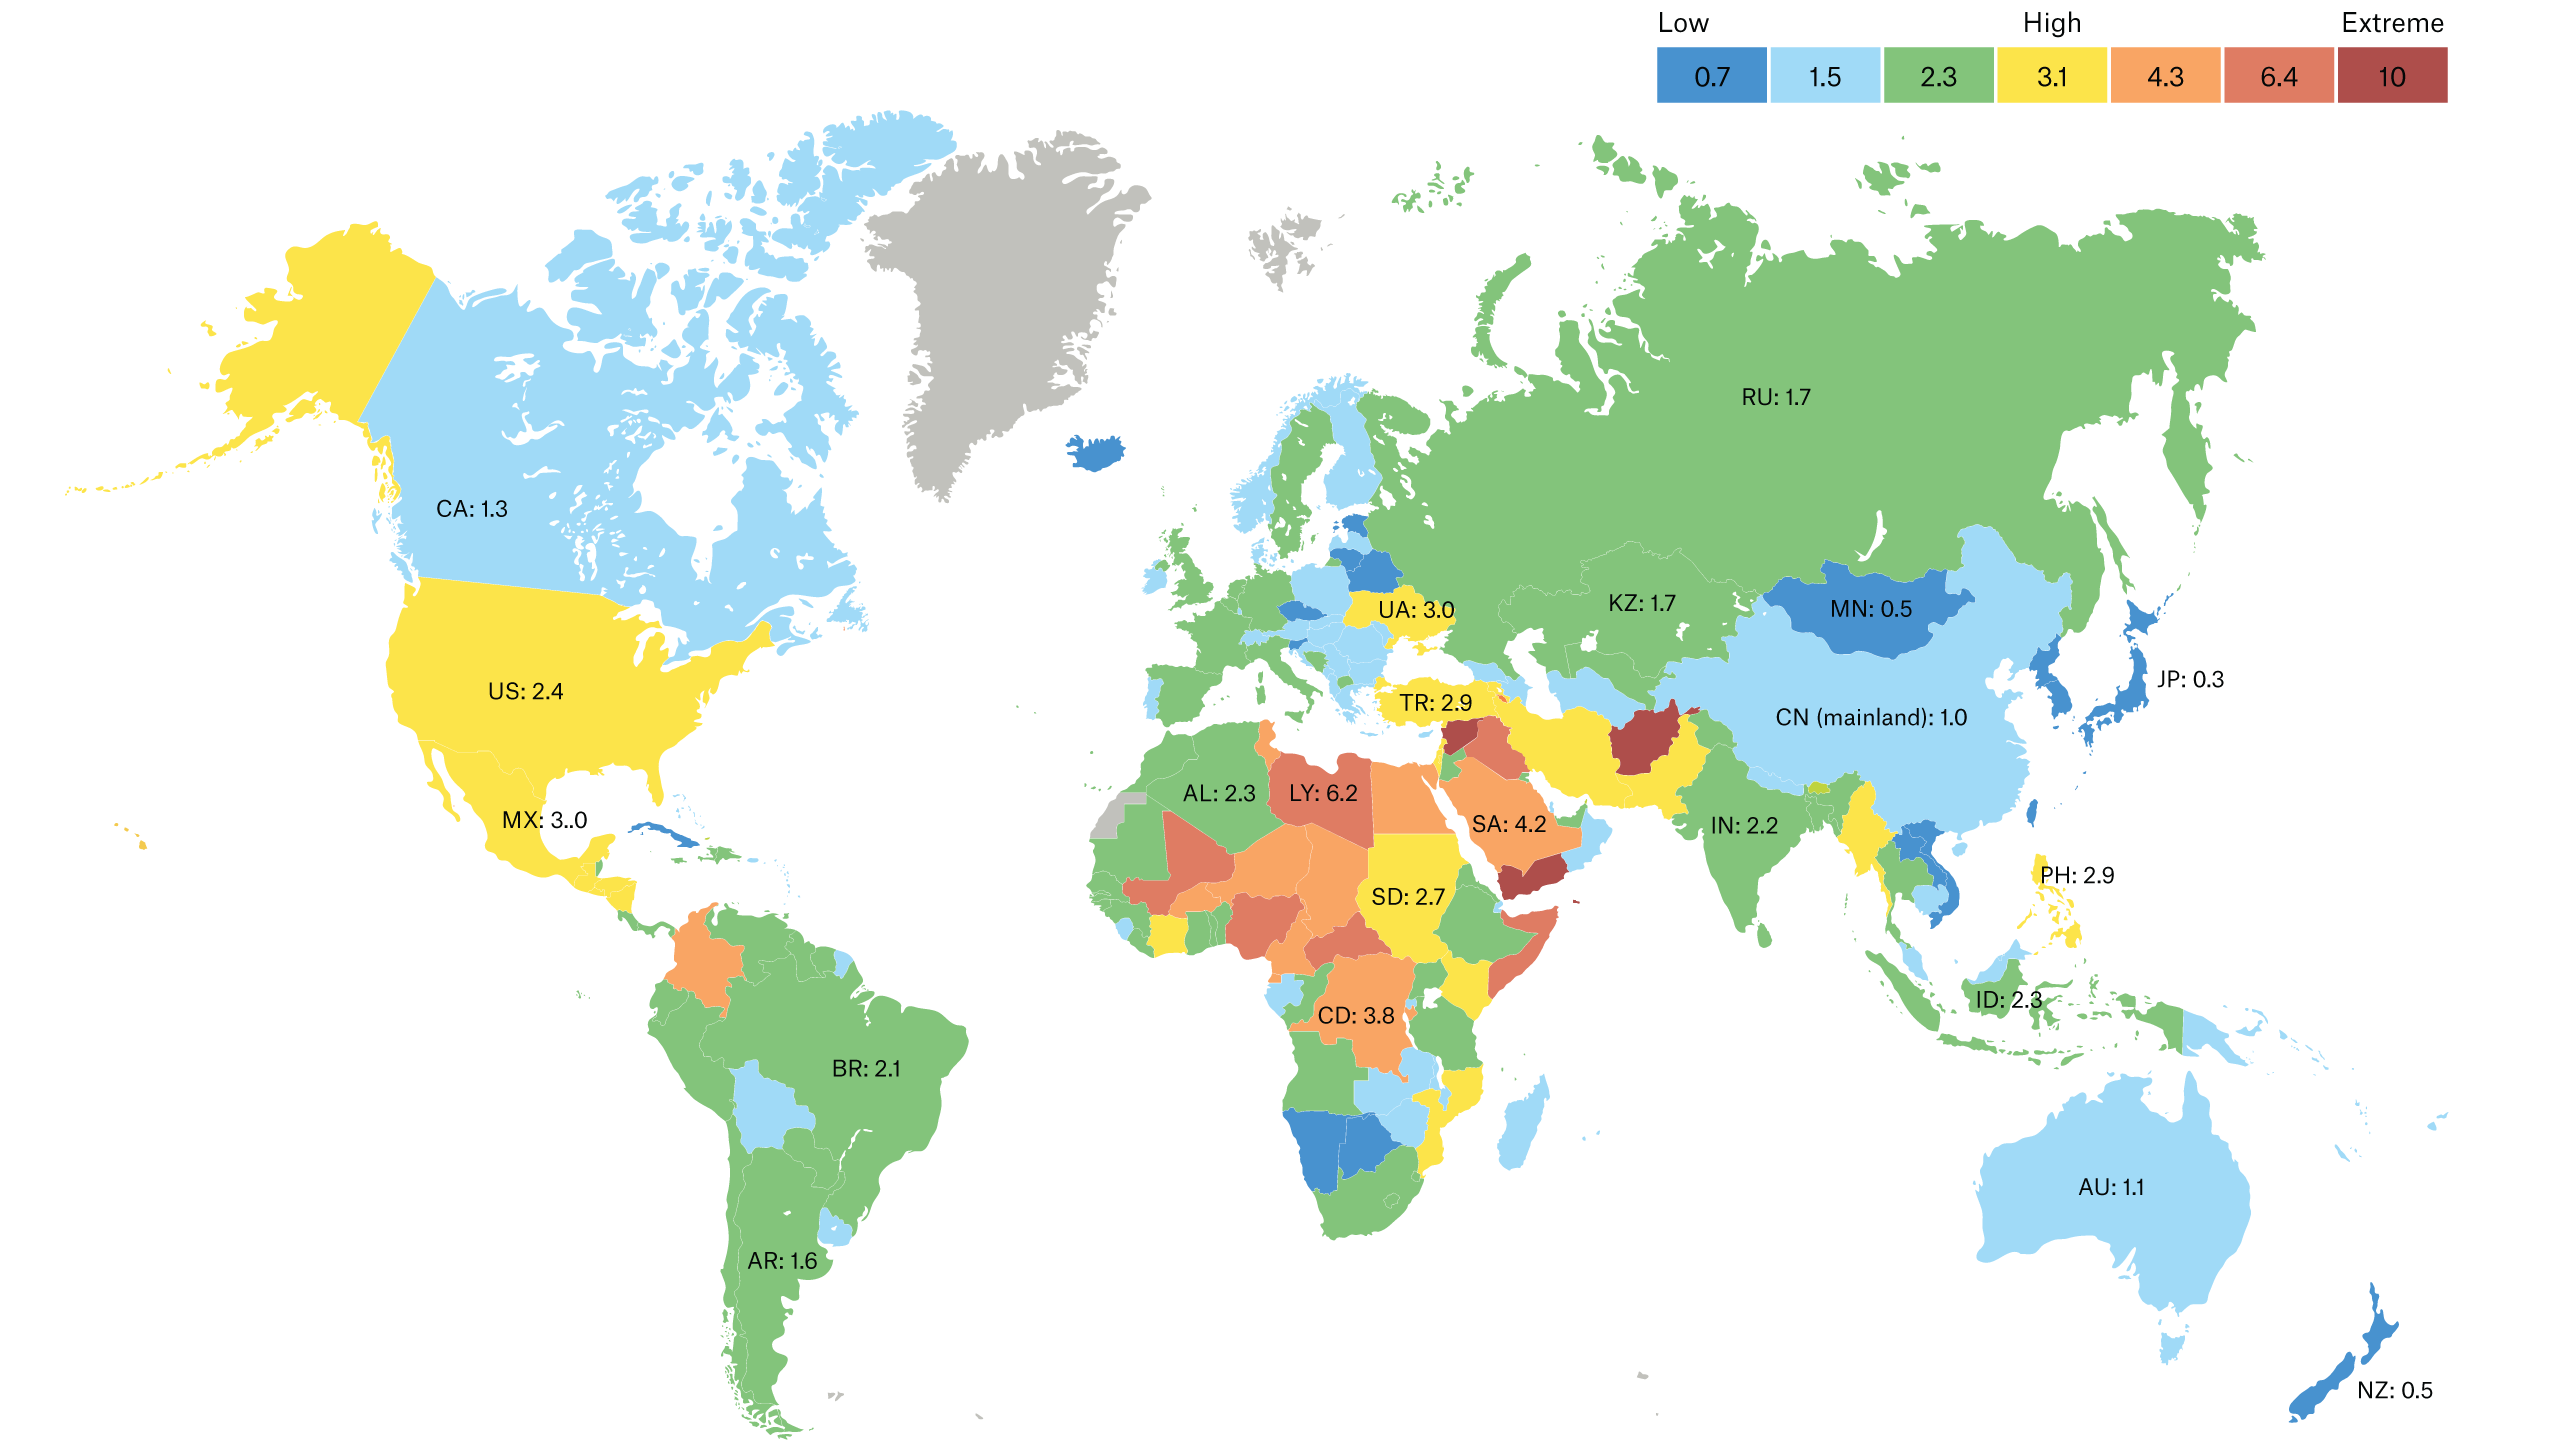 Map of the world with different terrorism levels